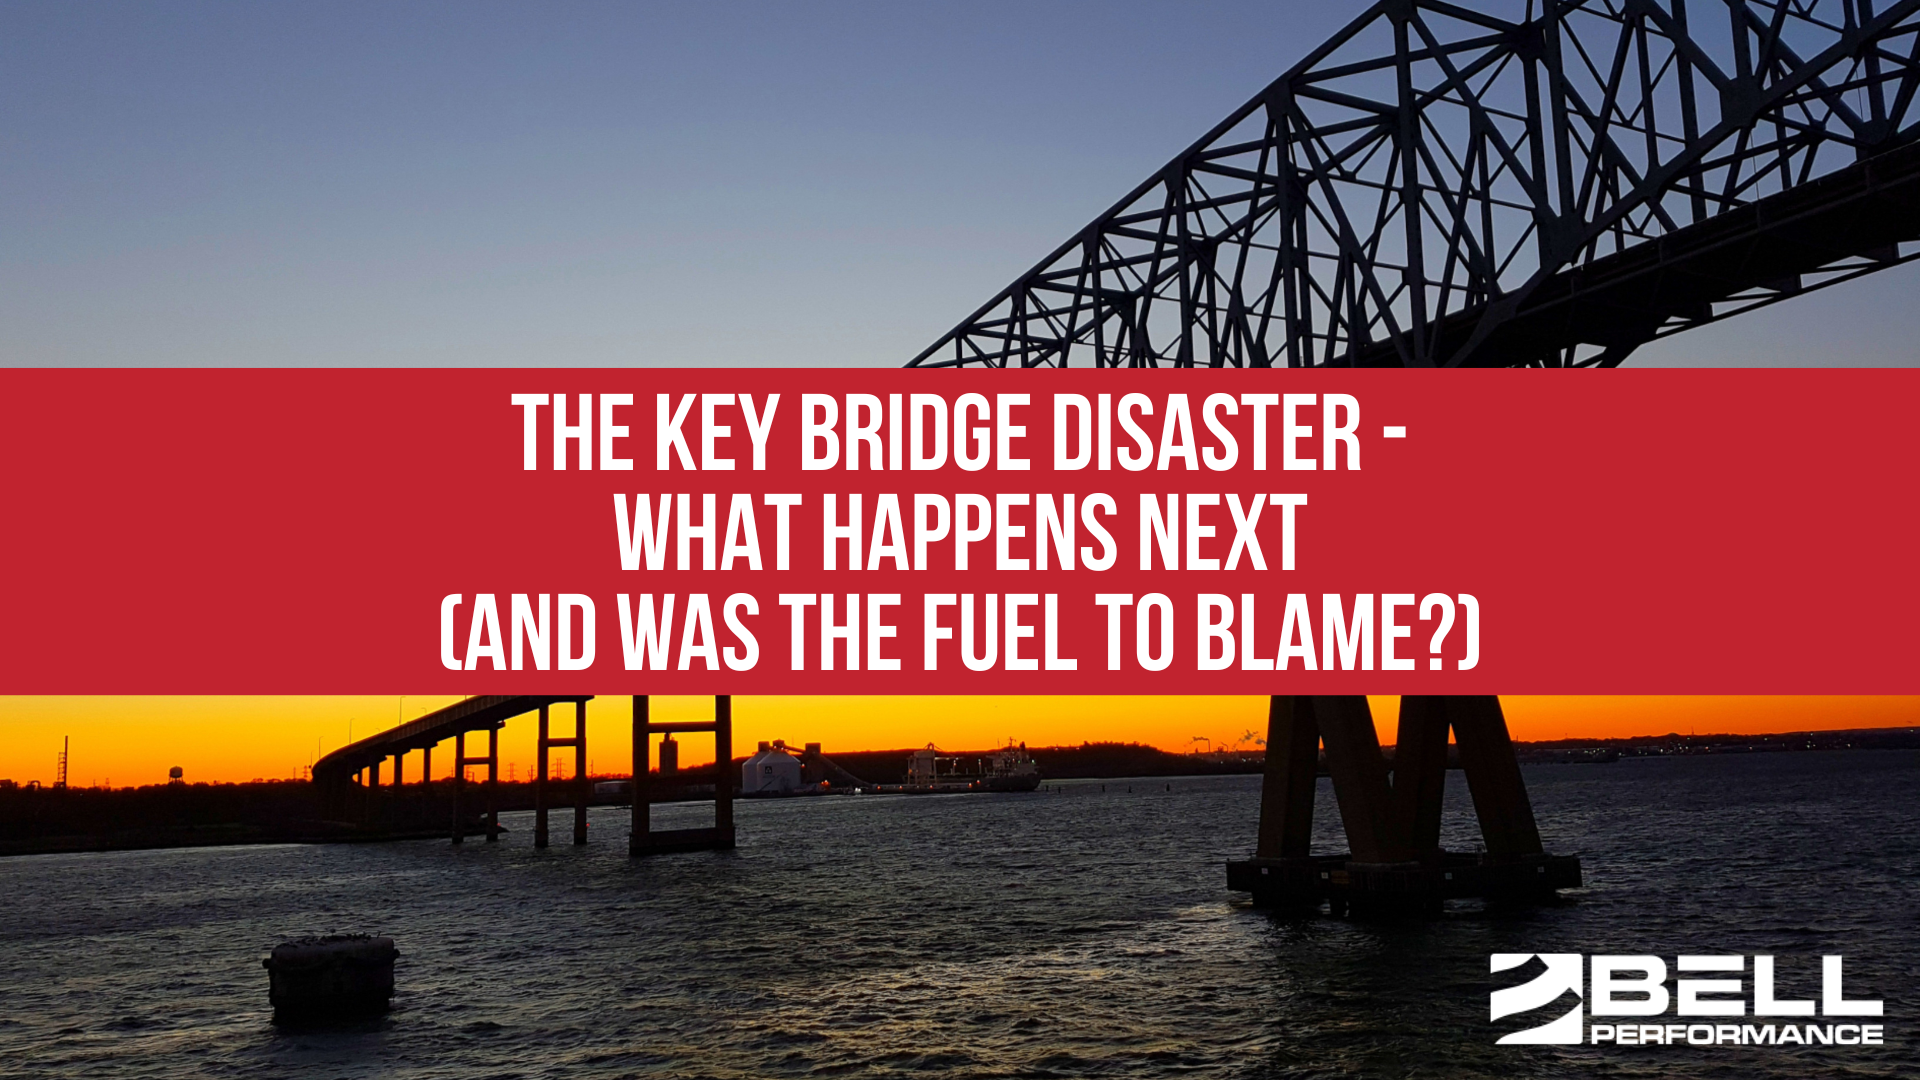 The Key Bridge Disaster - What Happens Next (And Was The Fuel To Blame?)